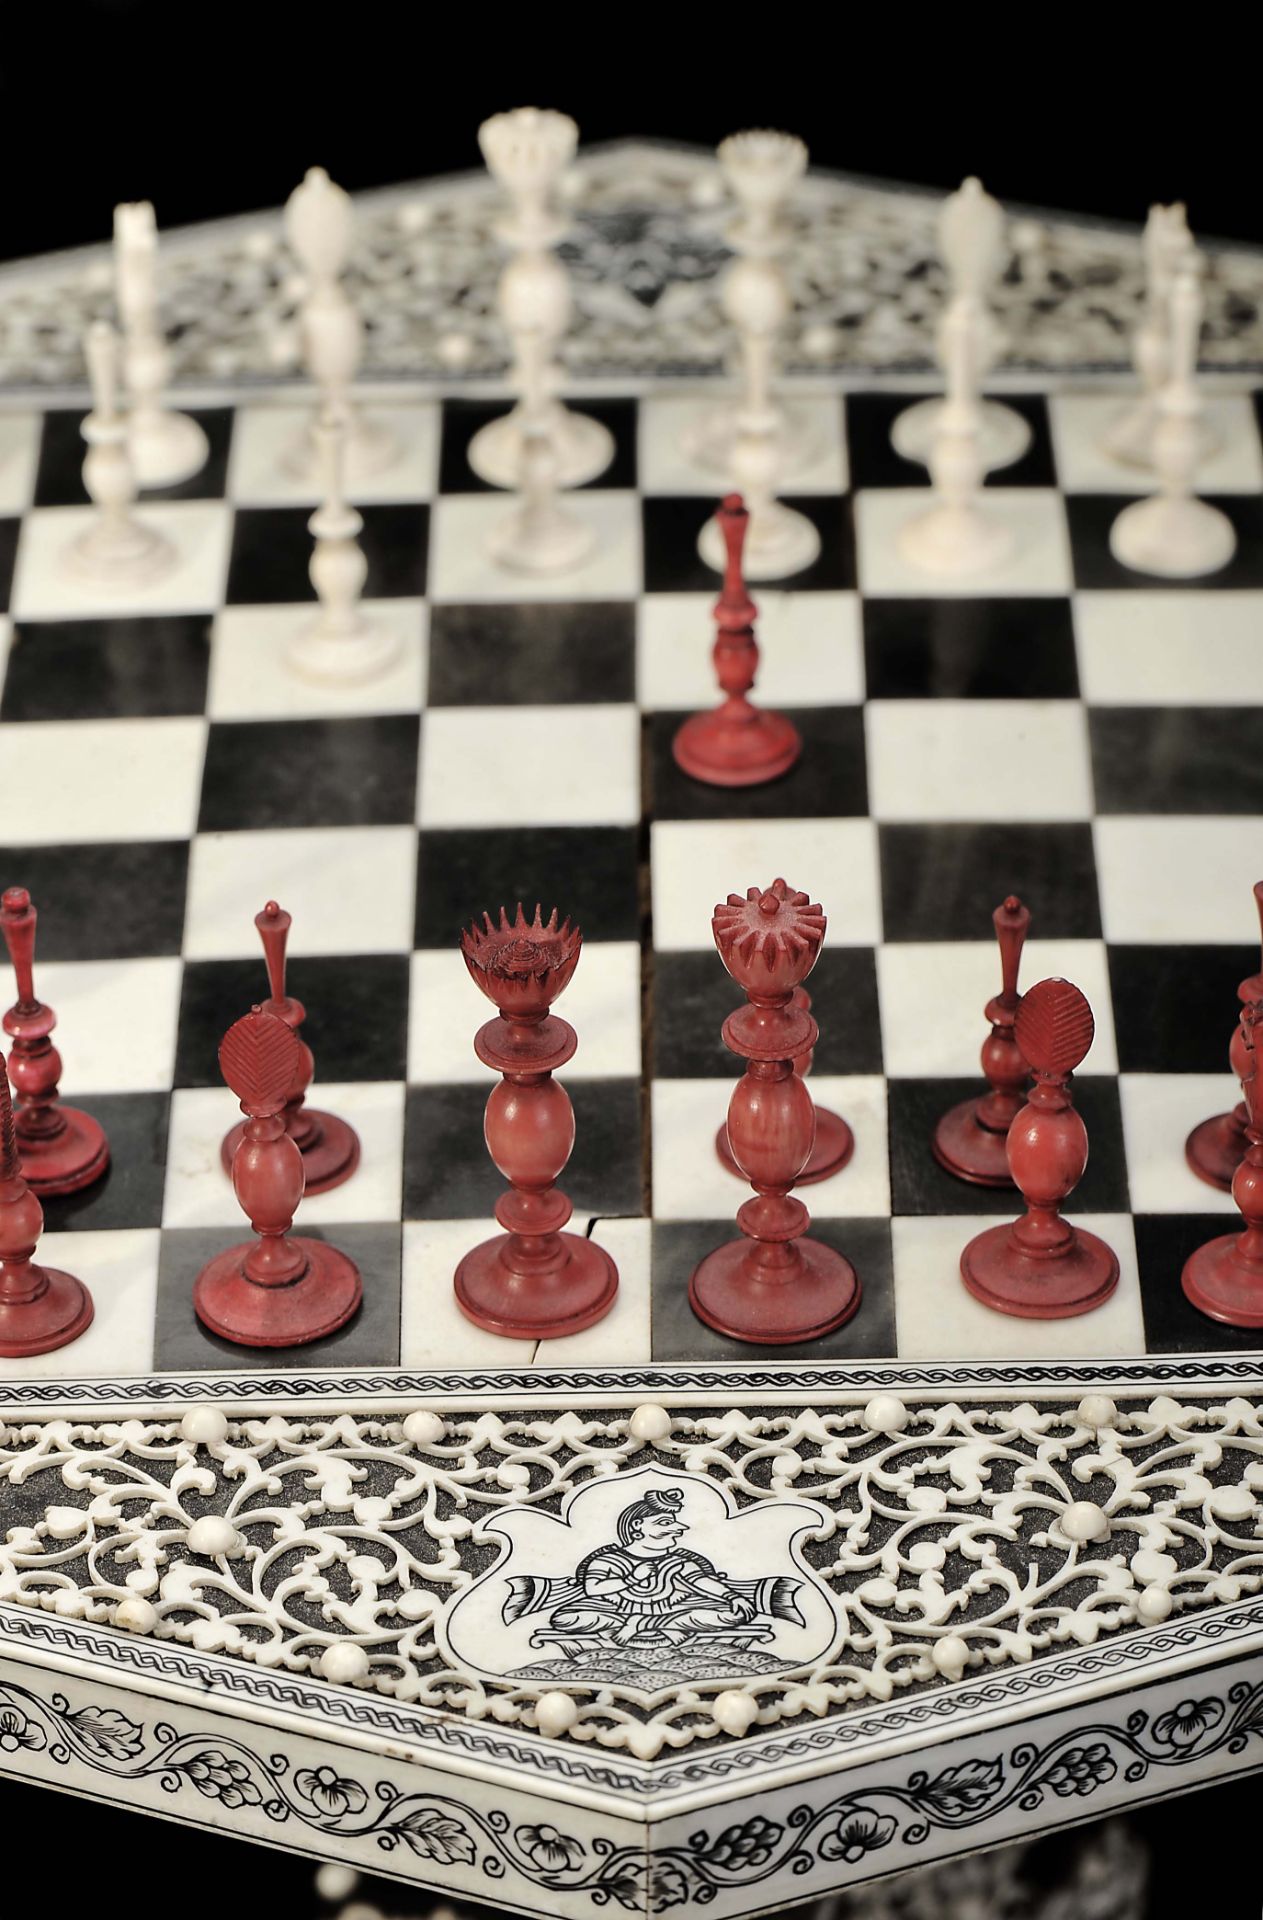 Miniature game table with chess pieces - Image 2 of 7